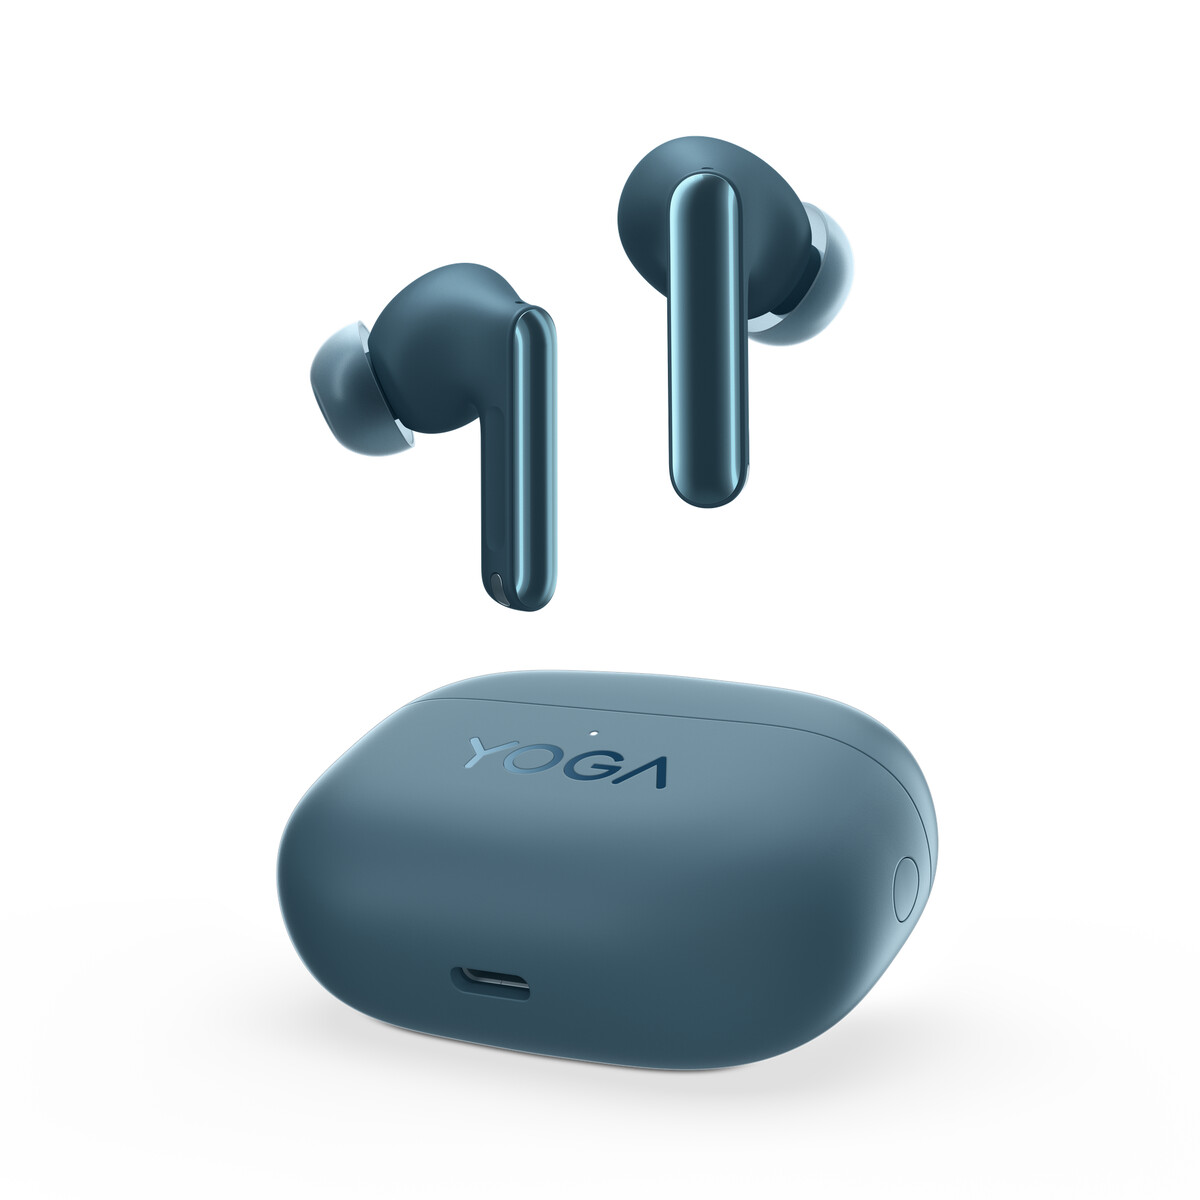 Lenovo Yoga True Wireless Stereo Earbuds debut as new Yoga PC companion for  $69.99 -  News